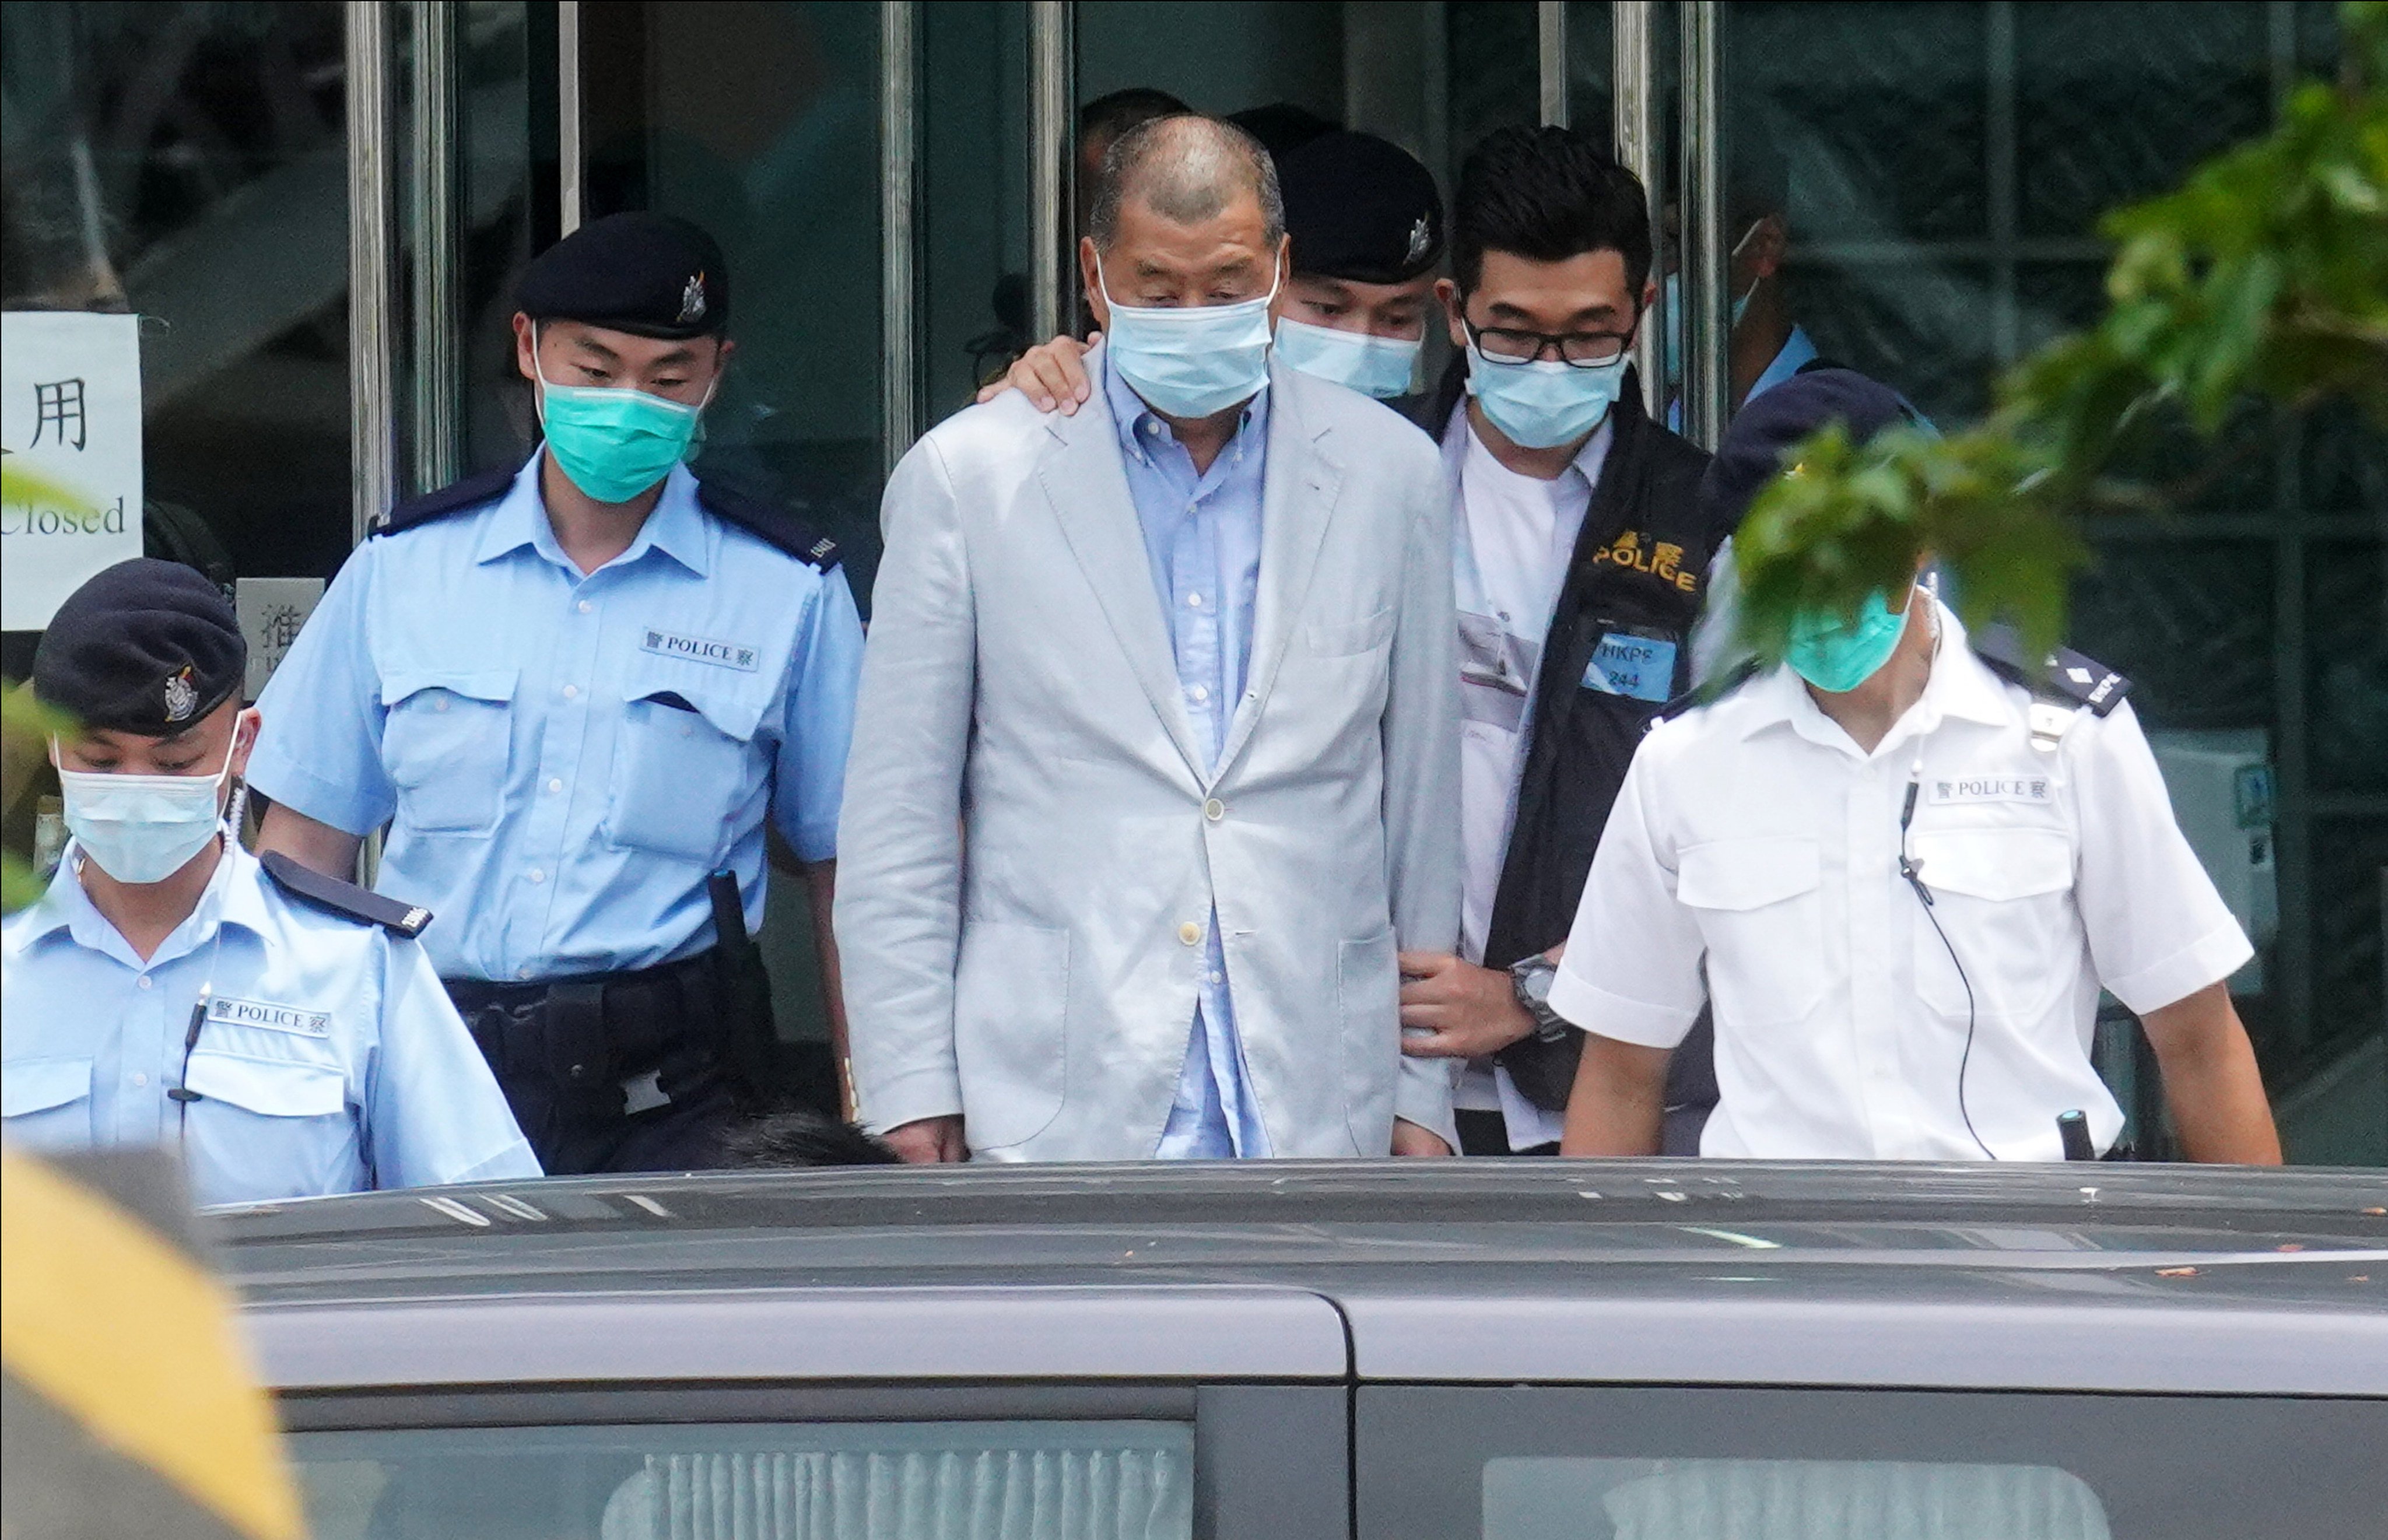 Jimmy Lai’s national security trial entered its 30th day on Wednesday. Photo: Winson Wong